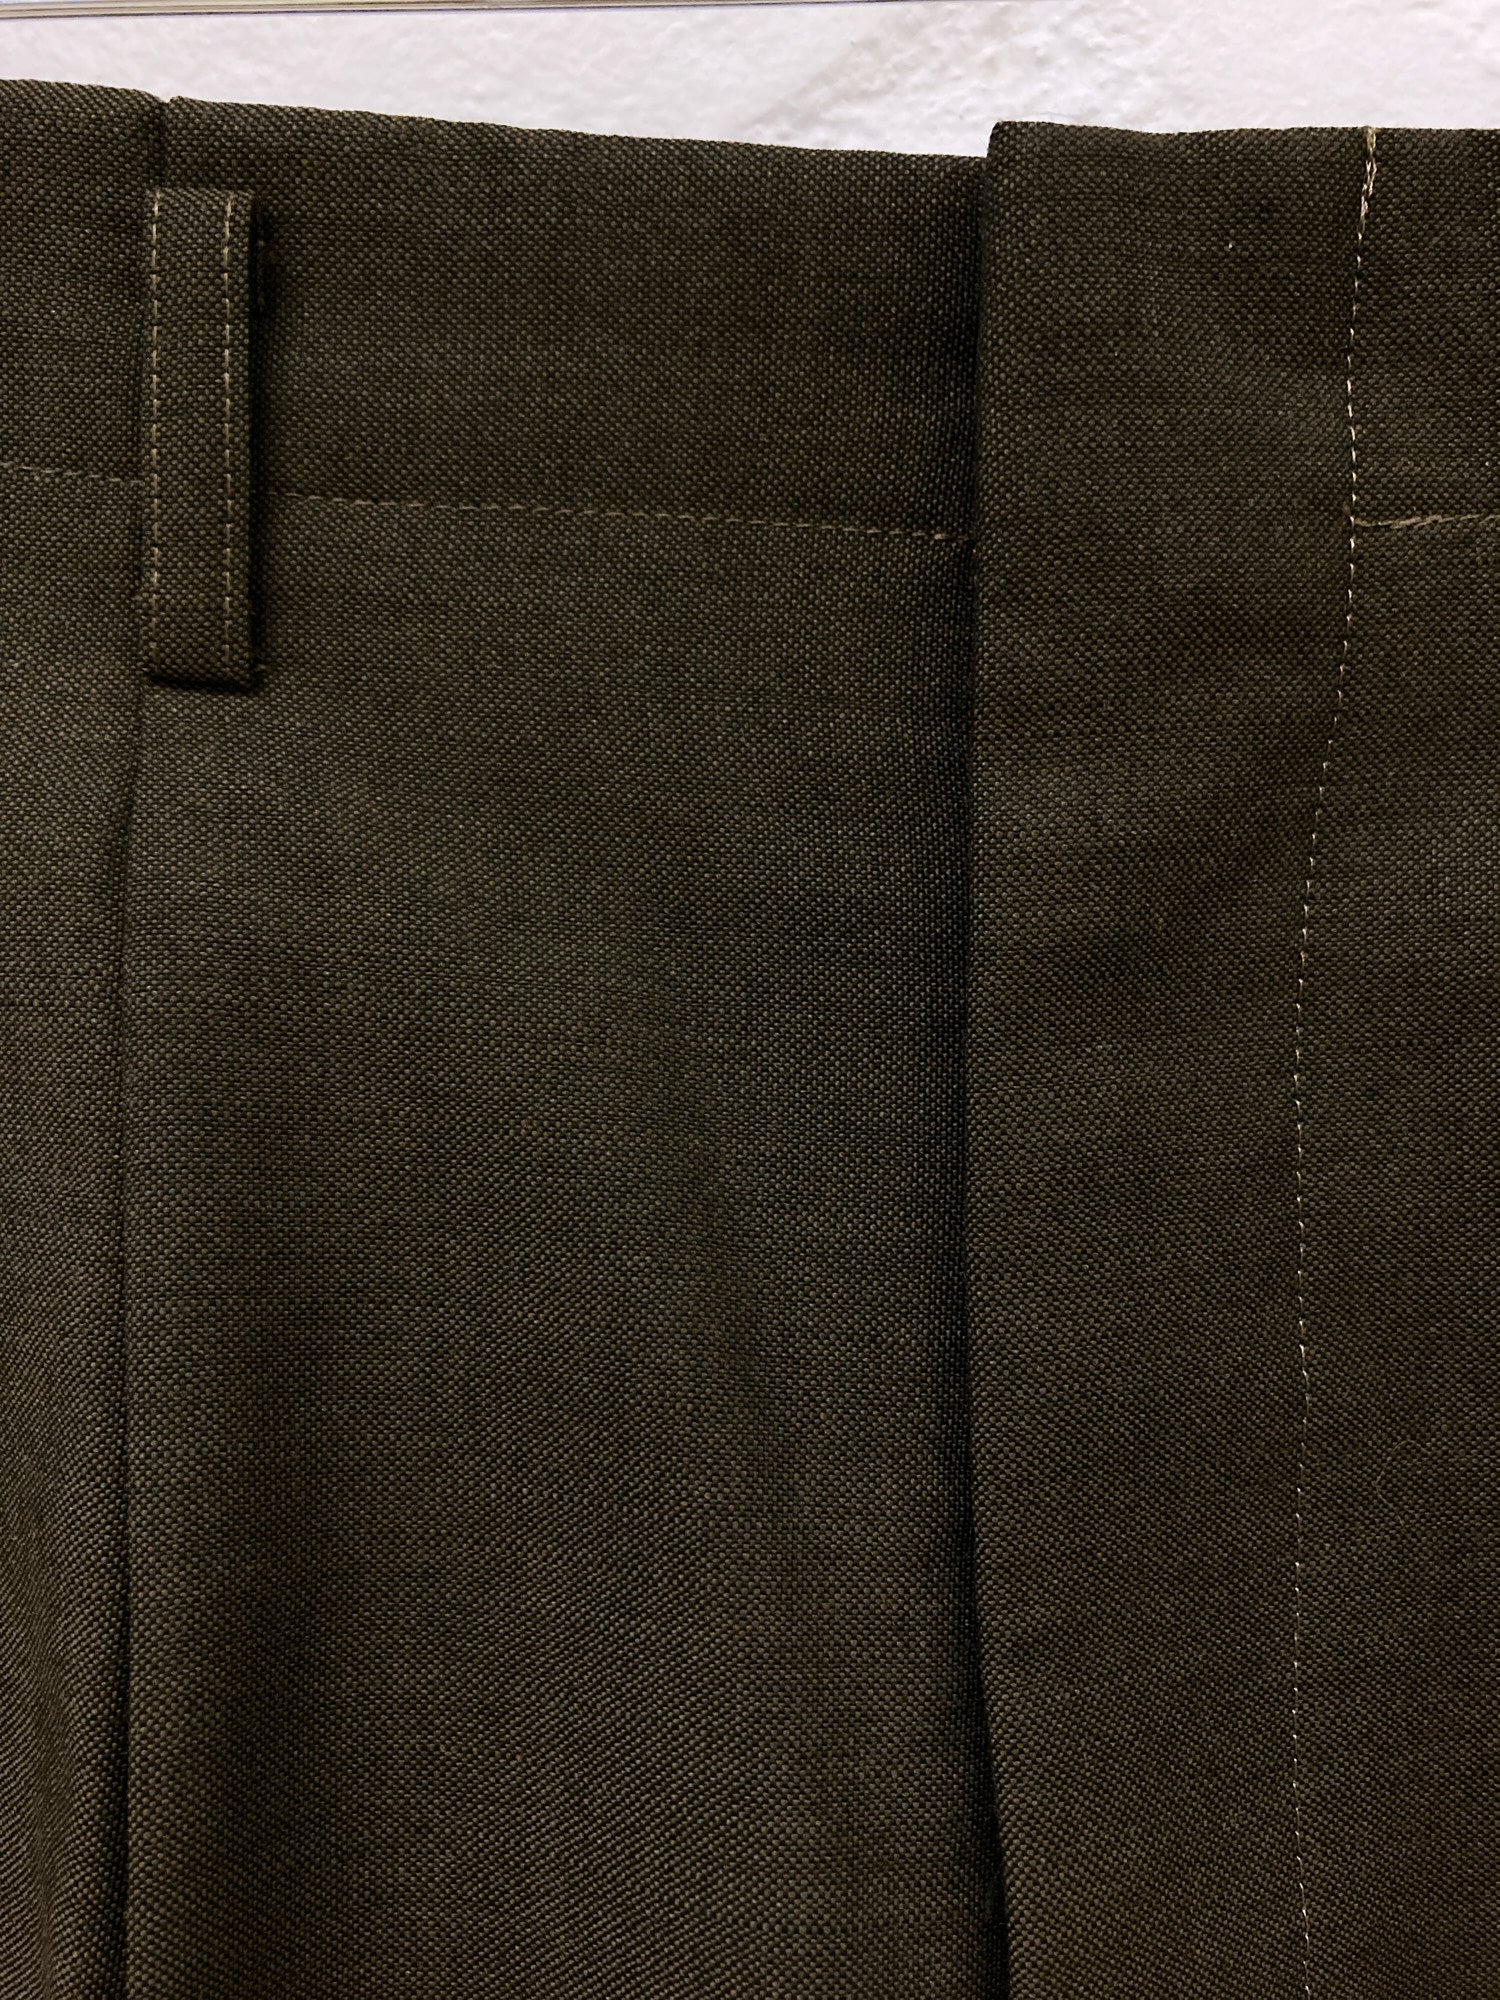 Comme des Garcons 1994 dark khaki brown wool cropped trousers - M